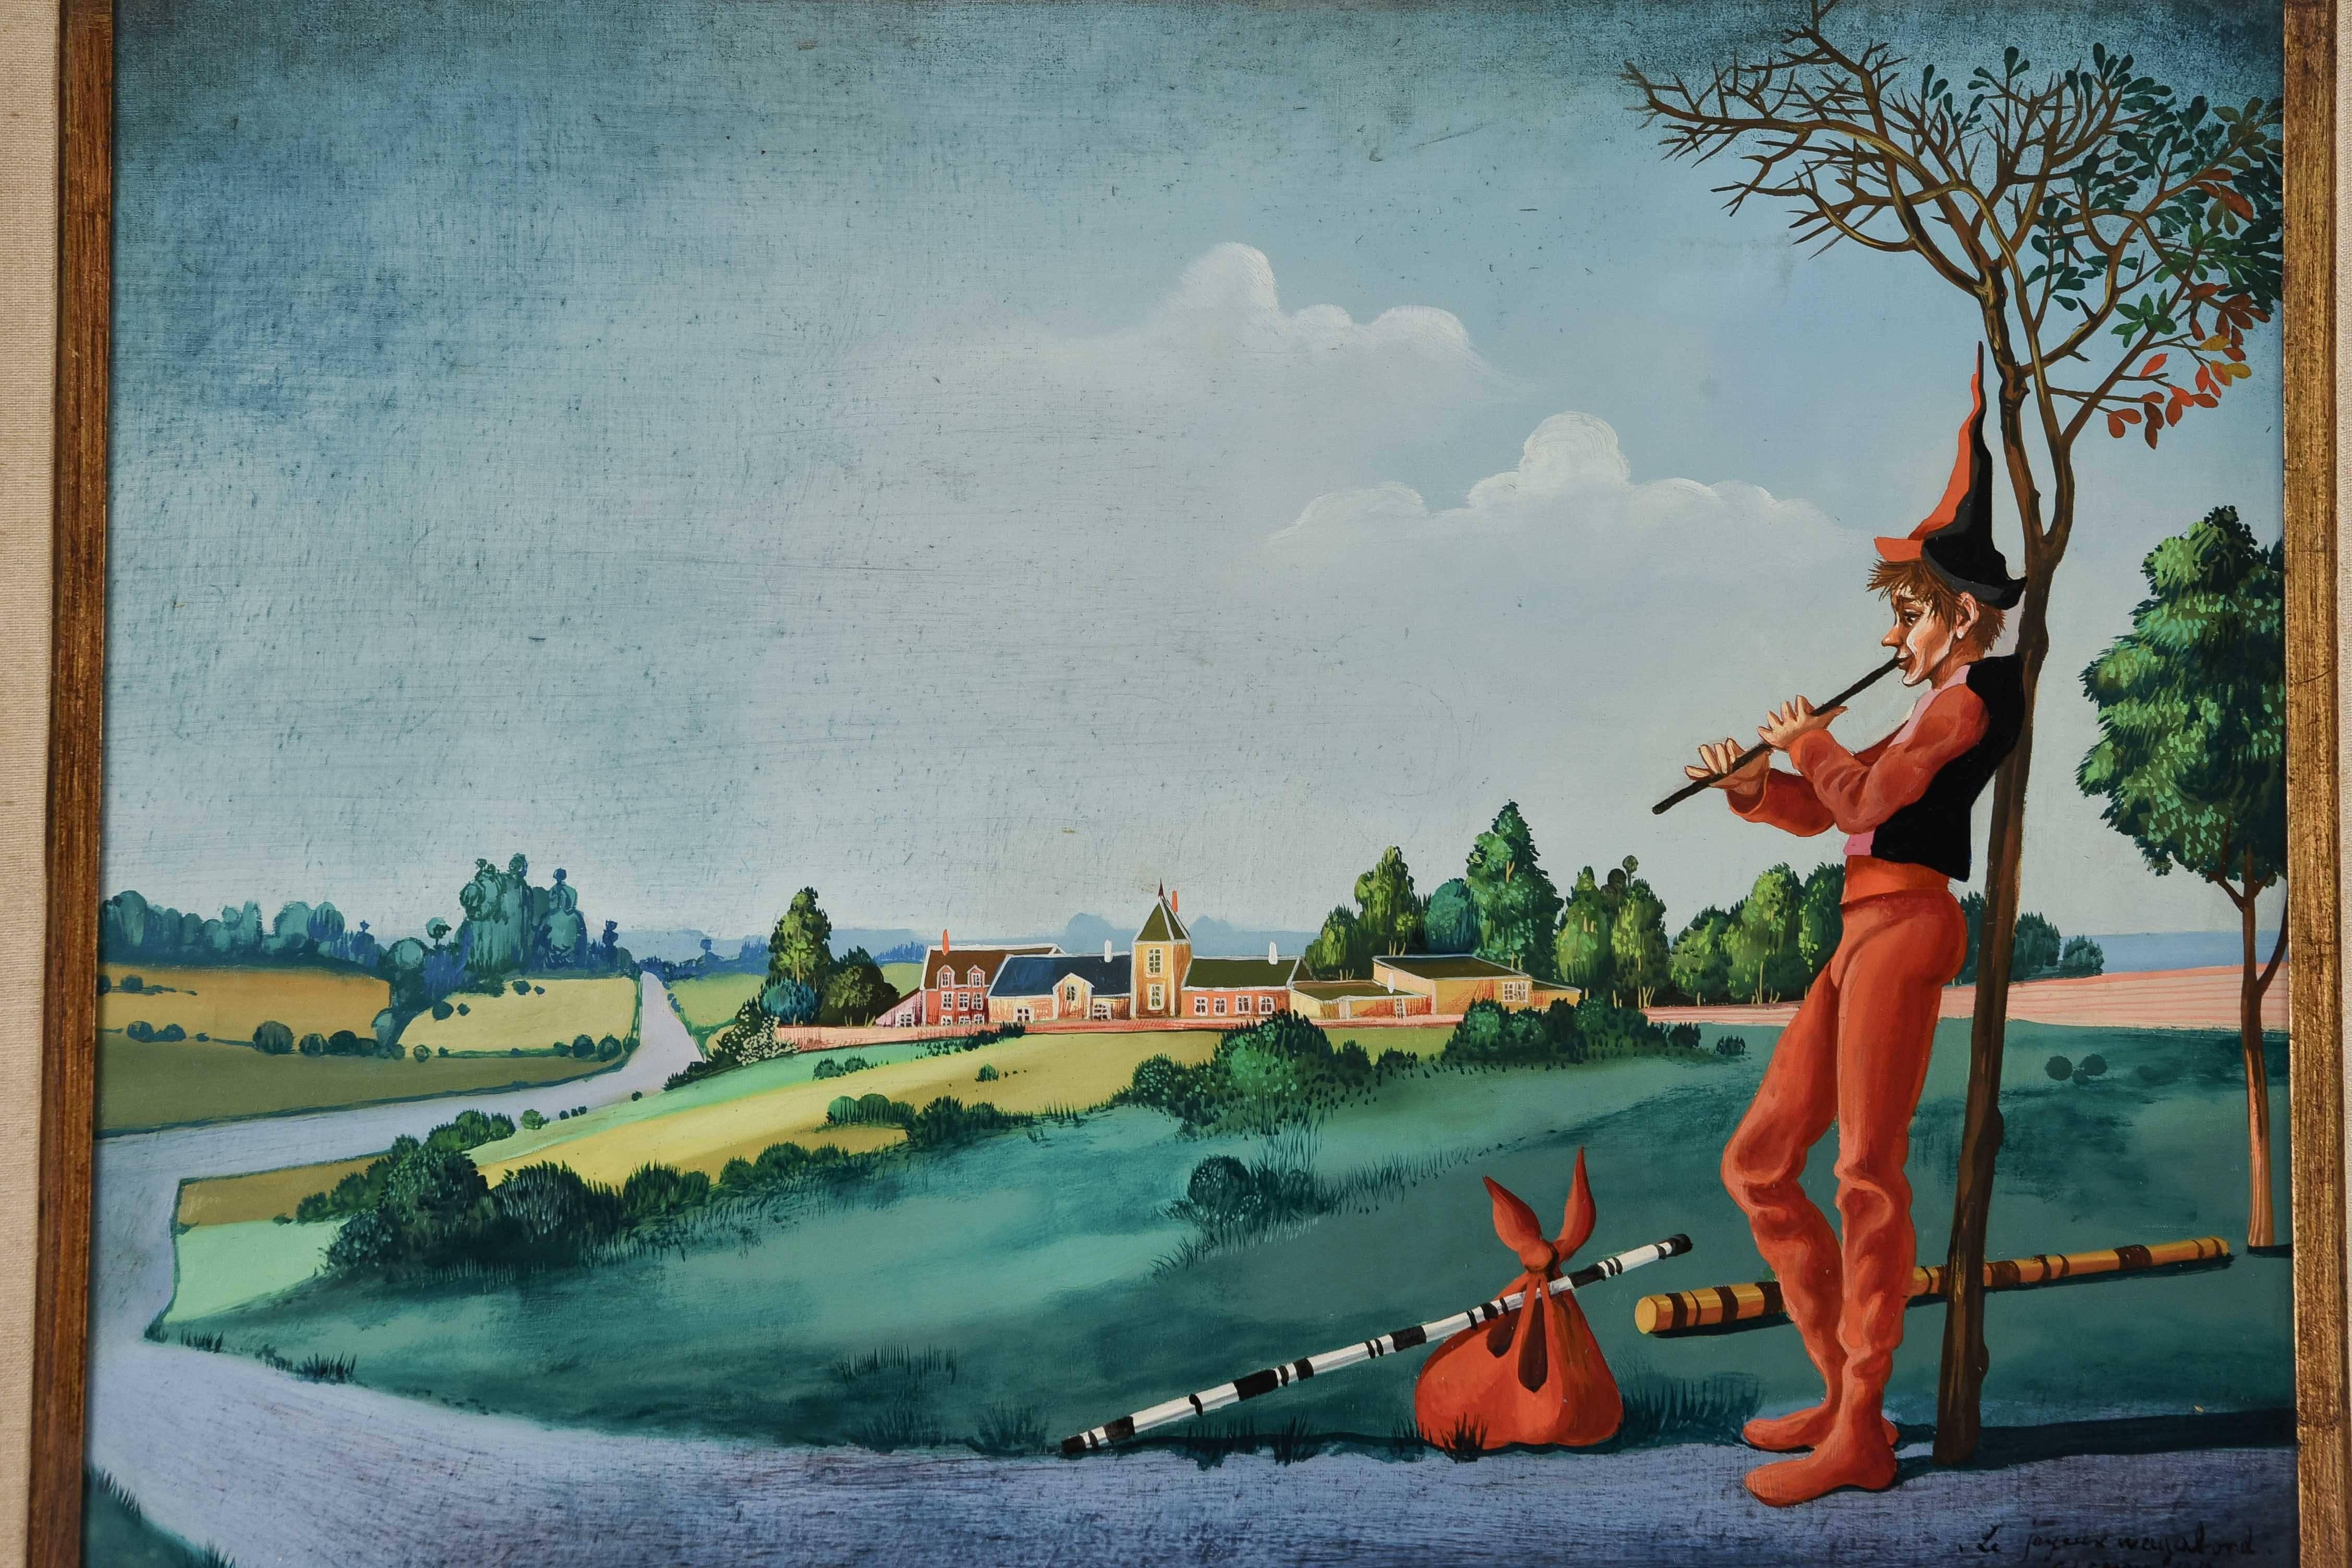 A vibrant surrealist painting by listed French artist Jean Pierre Clement depicting a male figure in red, whimsical clothing playing the flute against a countryside landscape.

Titled 